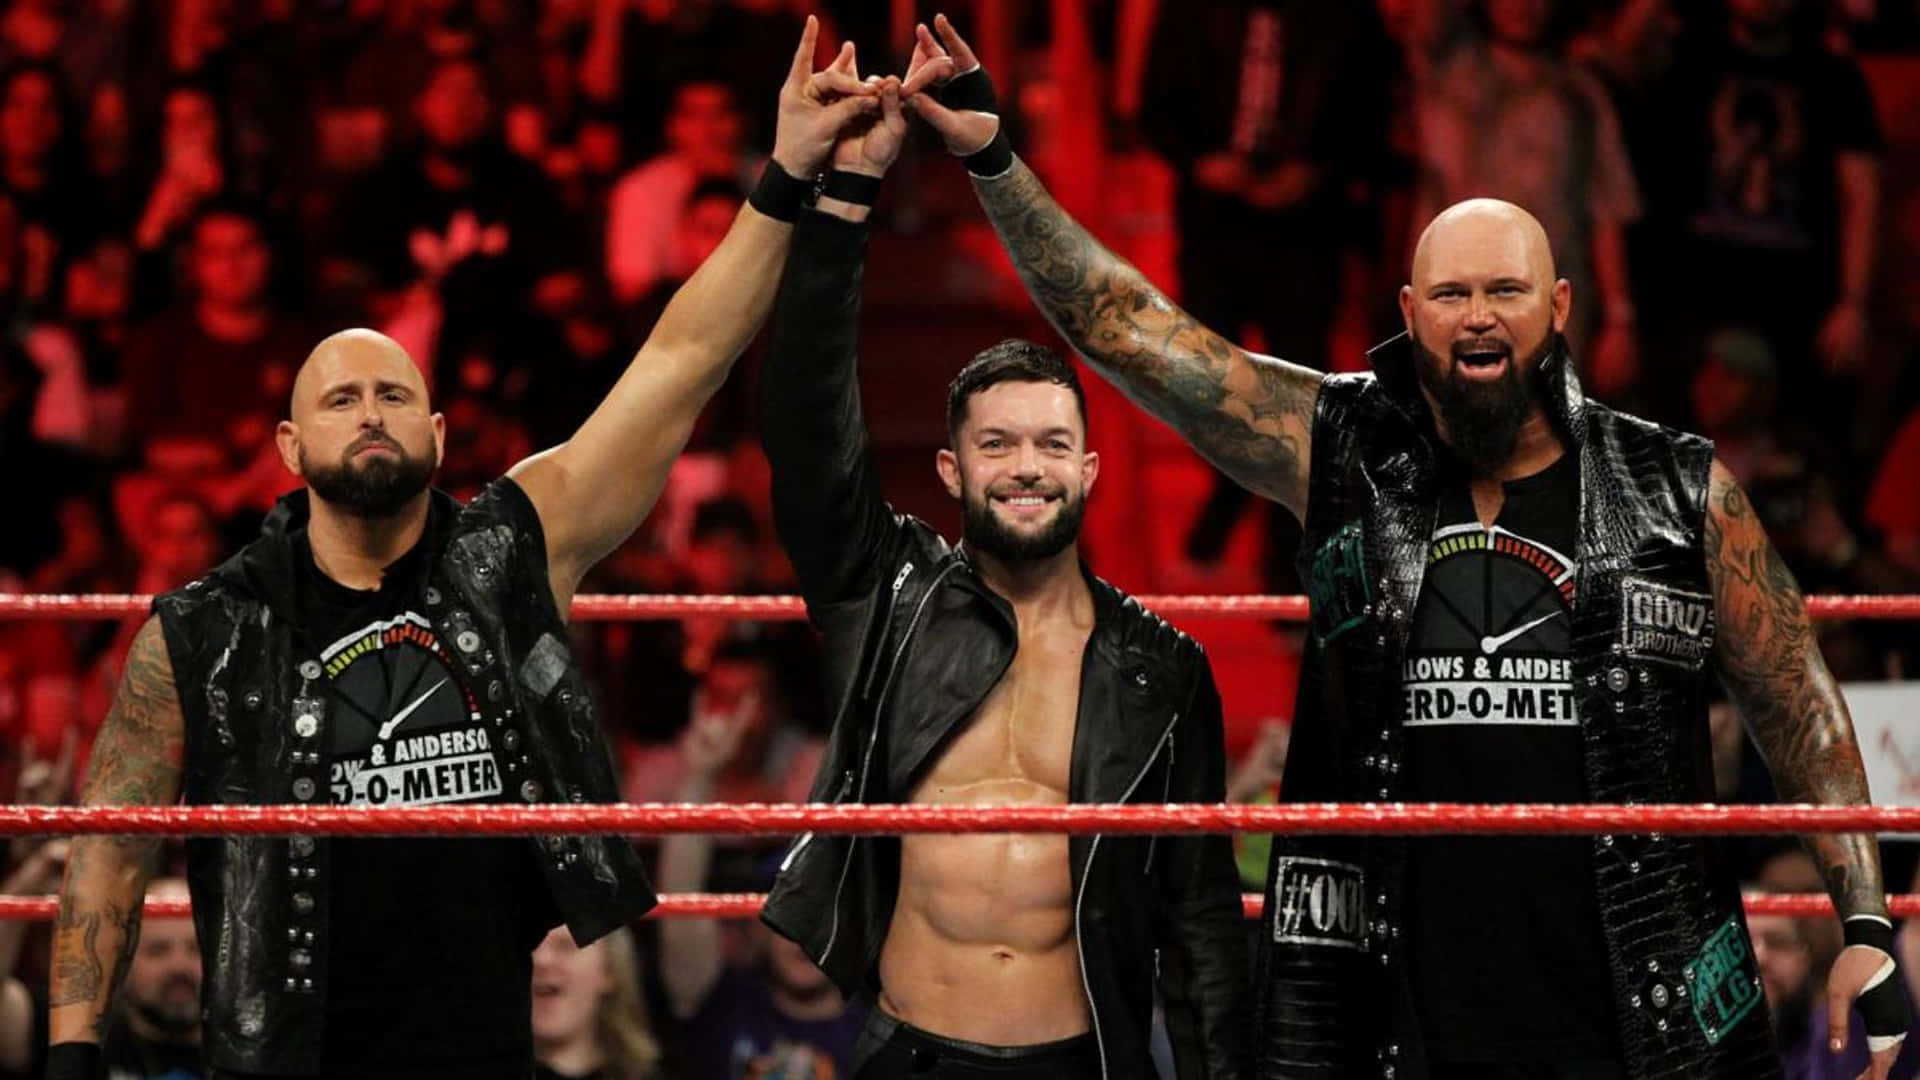 Victorious Duo Karl Anderson&Gallows Wallpaper